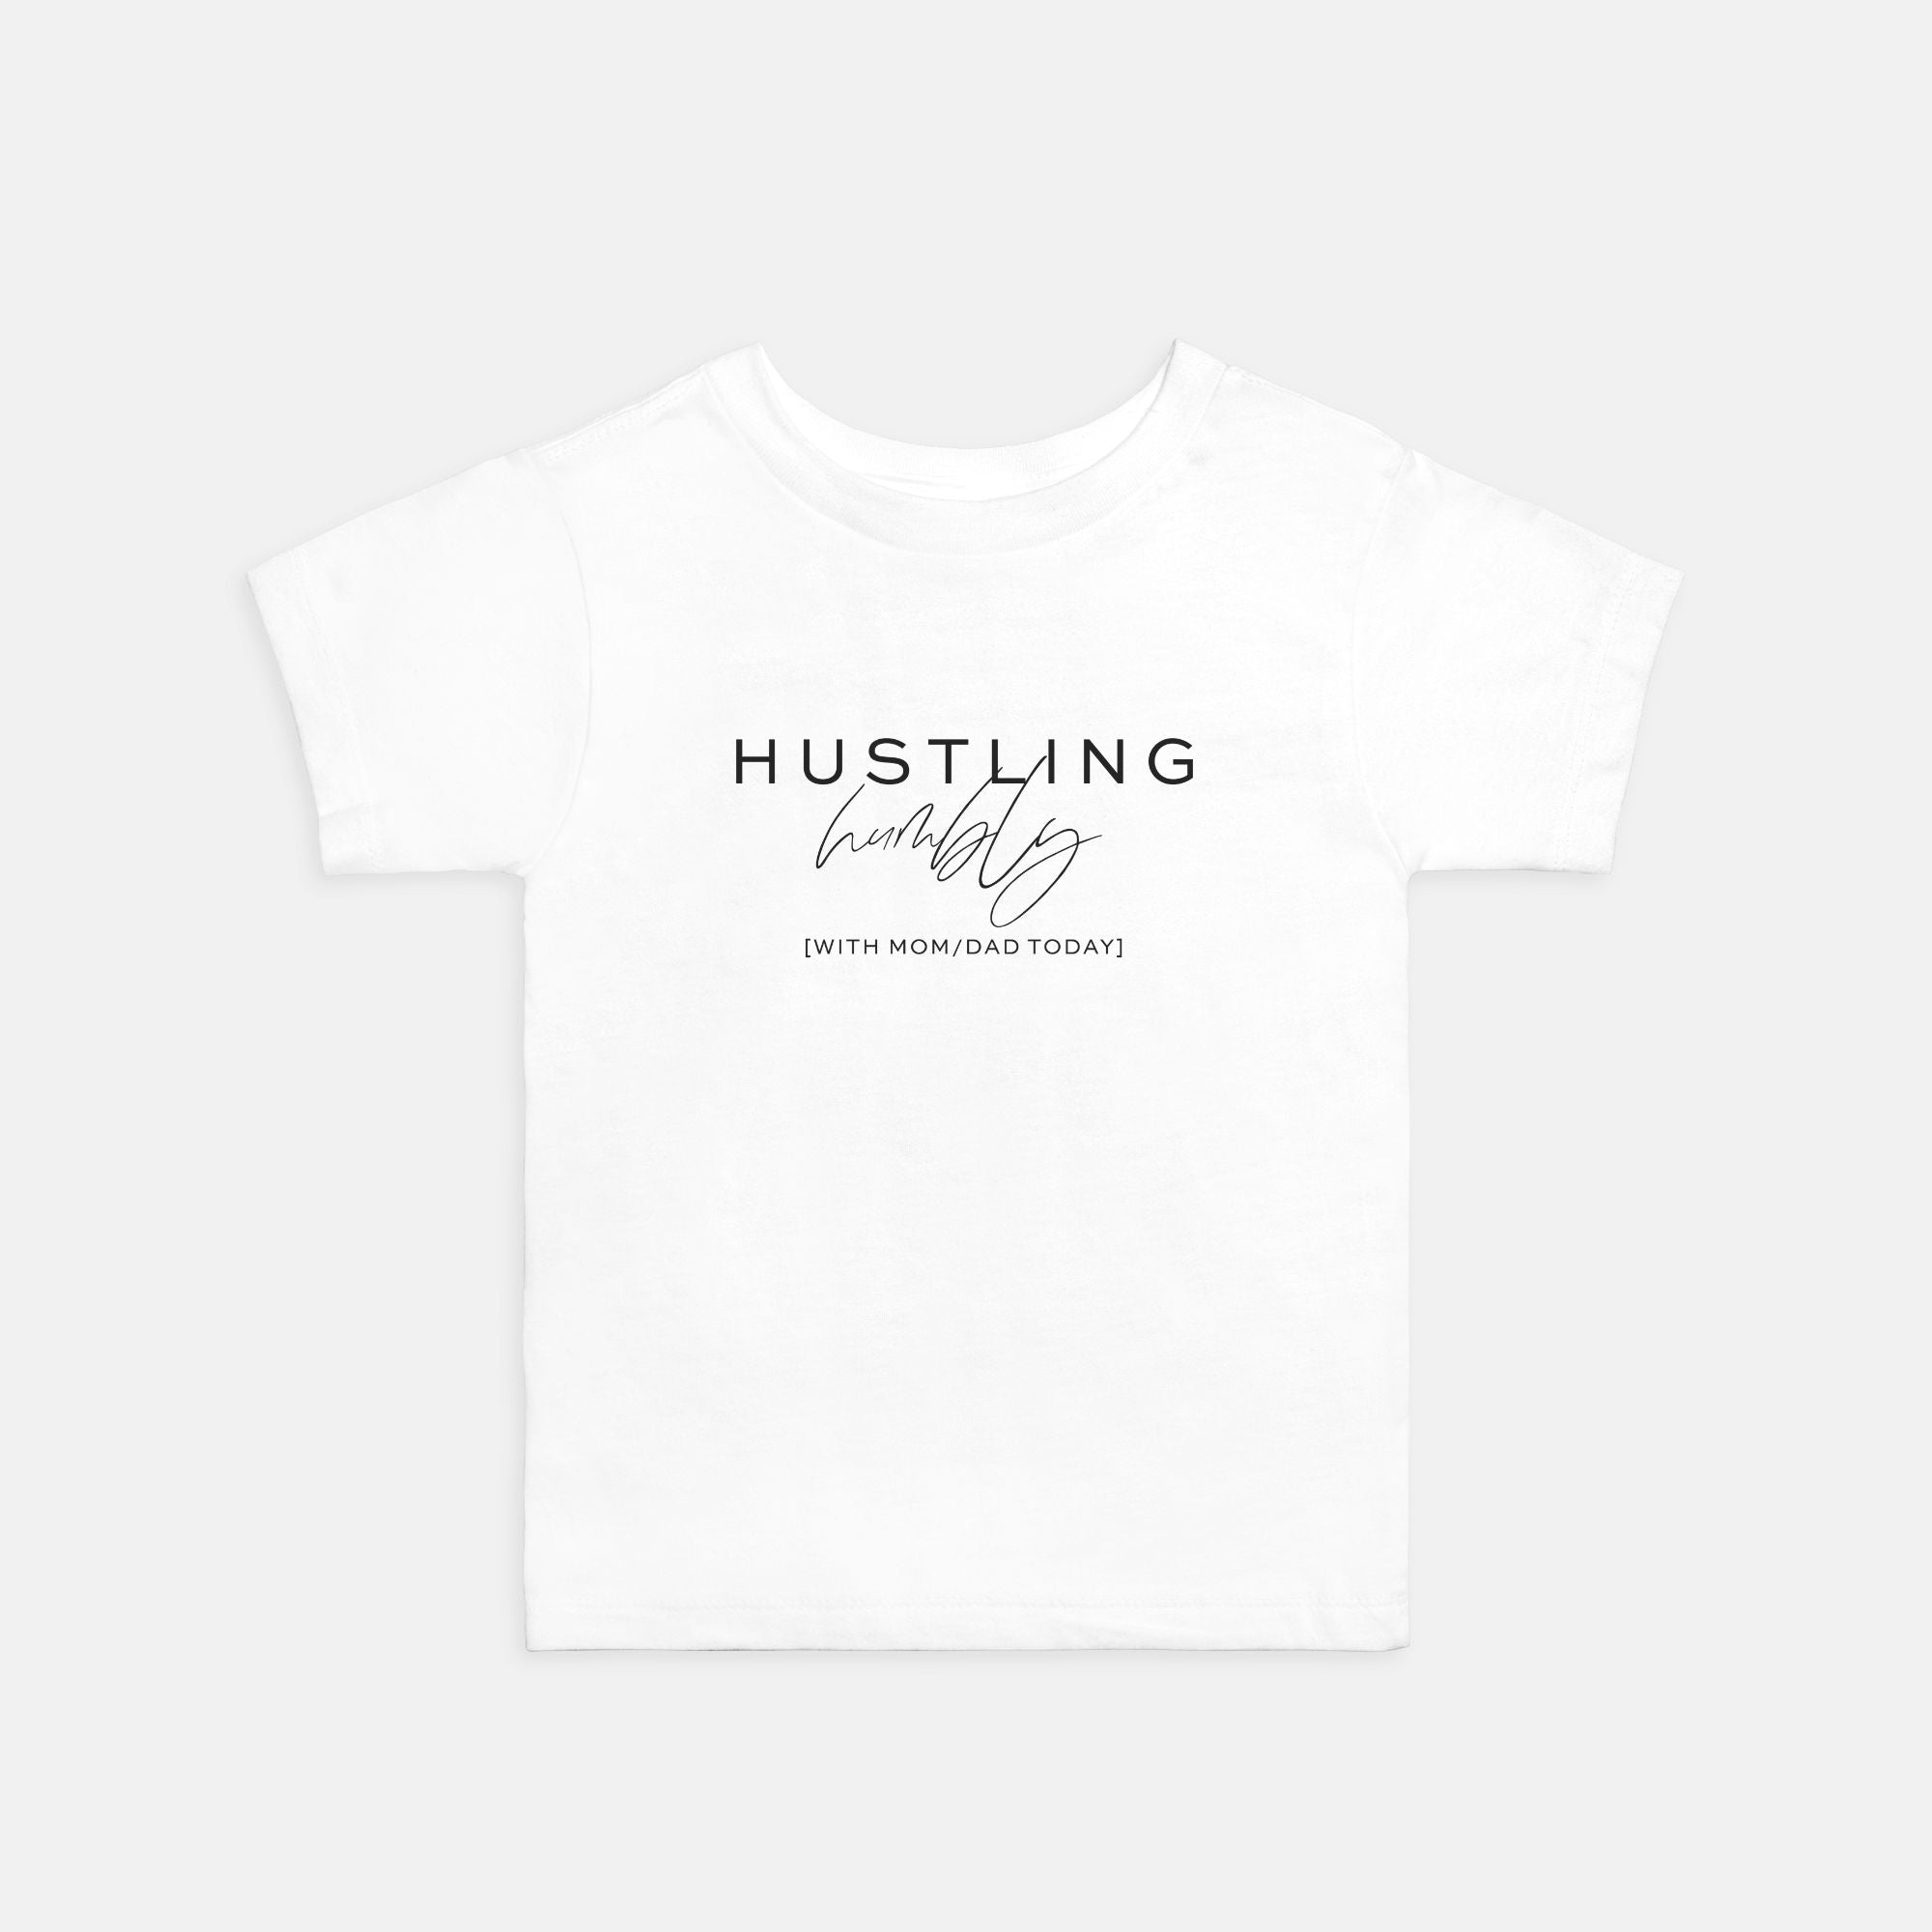 Hustling Humbly with Mom/Dad Today Toddler Tee (Athletic Heather, Pink, White)